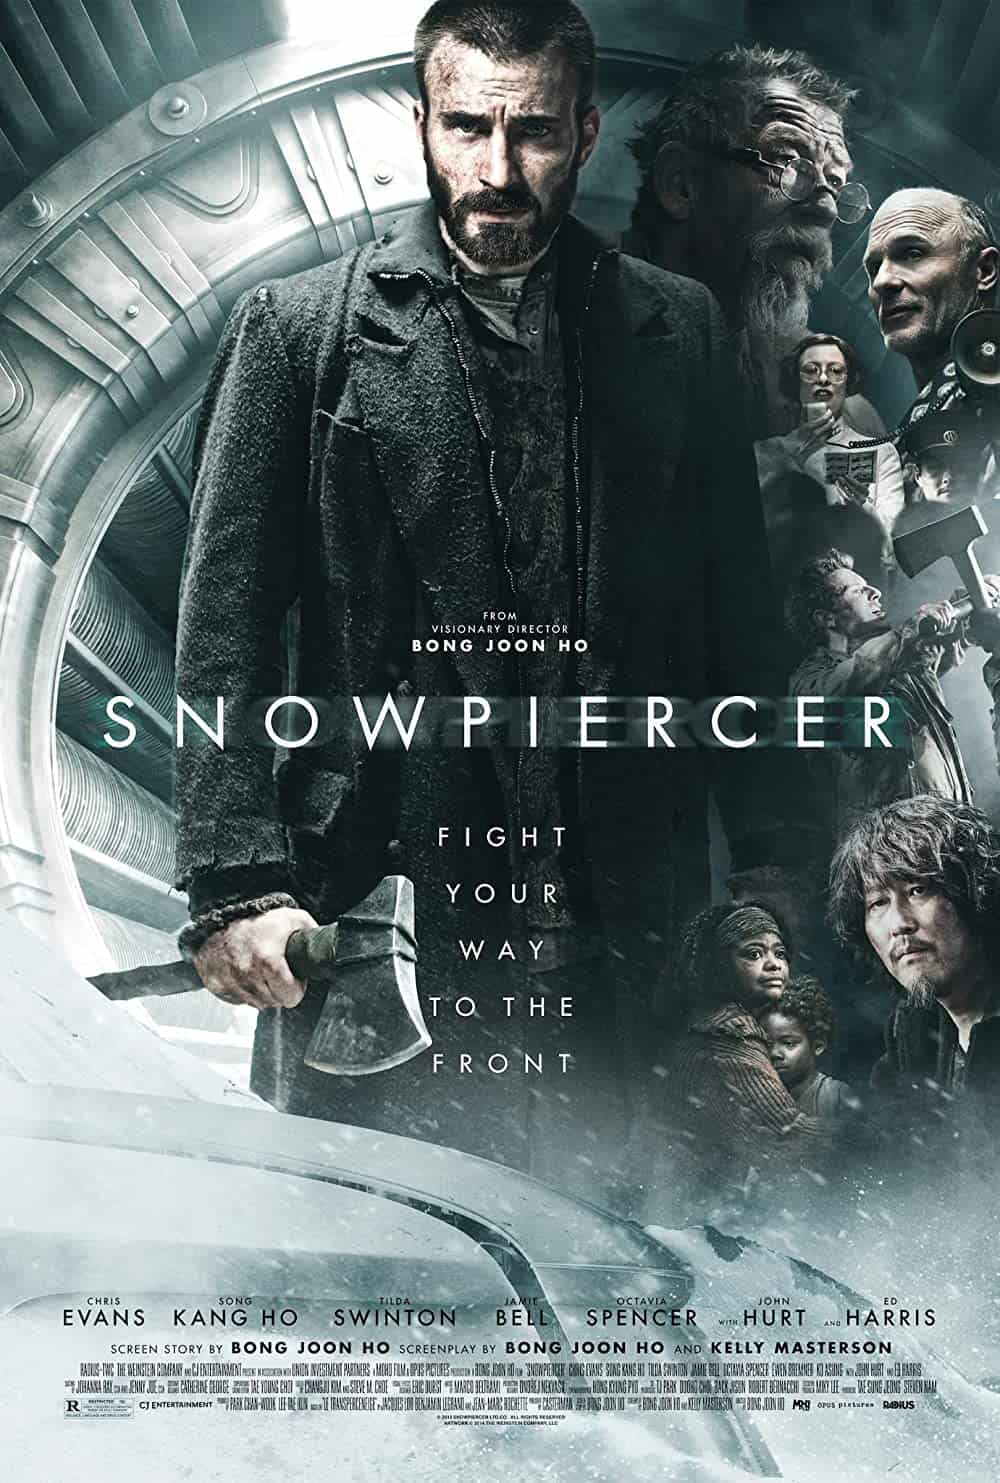 Best End of the World Movies You Can't Miss Snowpiercer (2013)